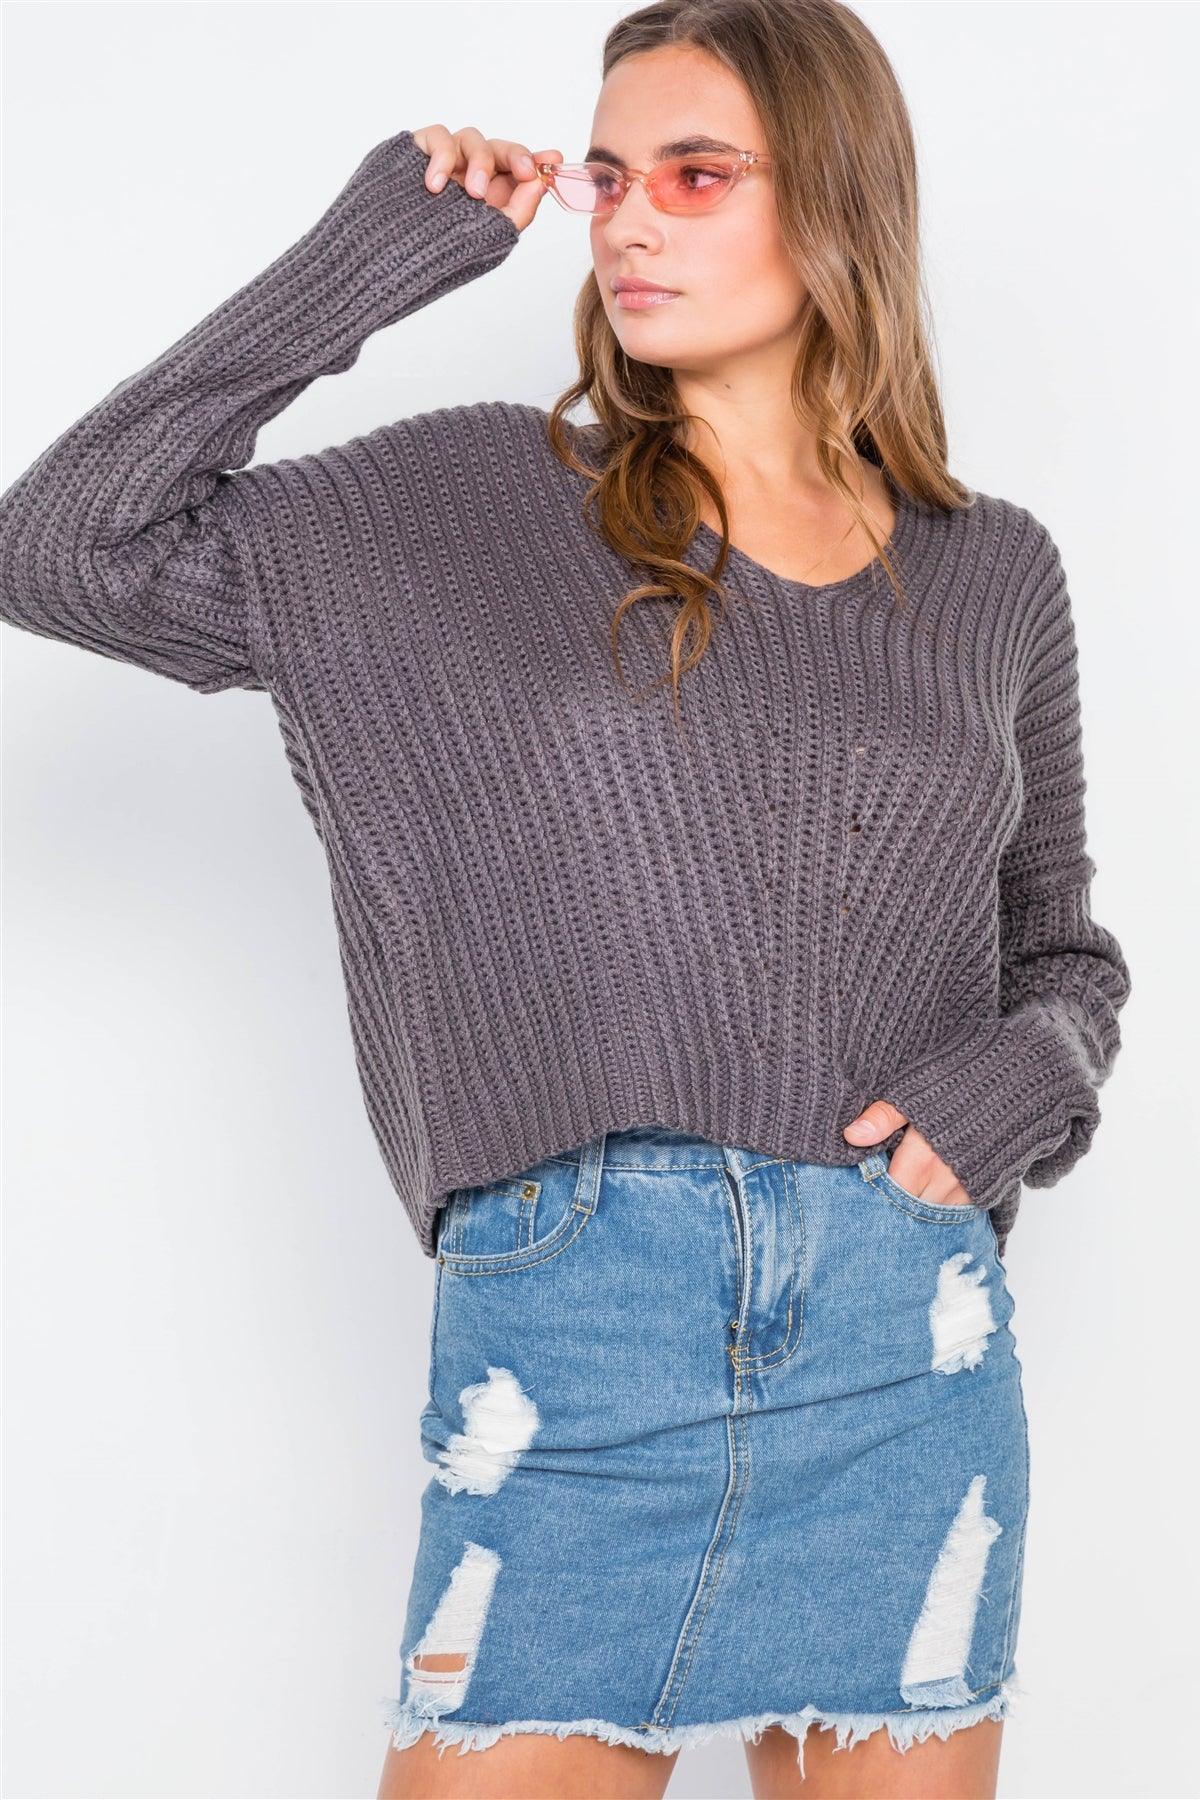 Charcoal Knit V-Neck Long Sleeve Sweater  /2-2